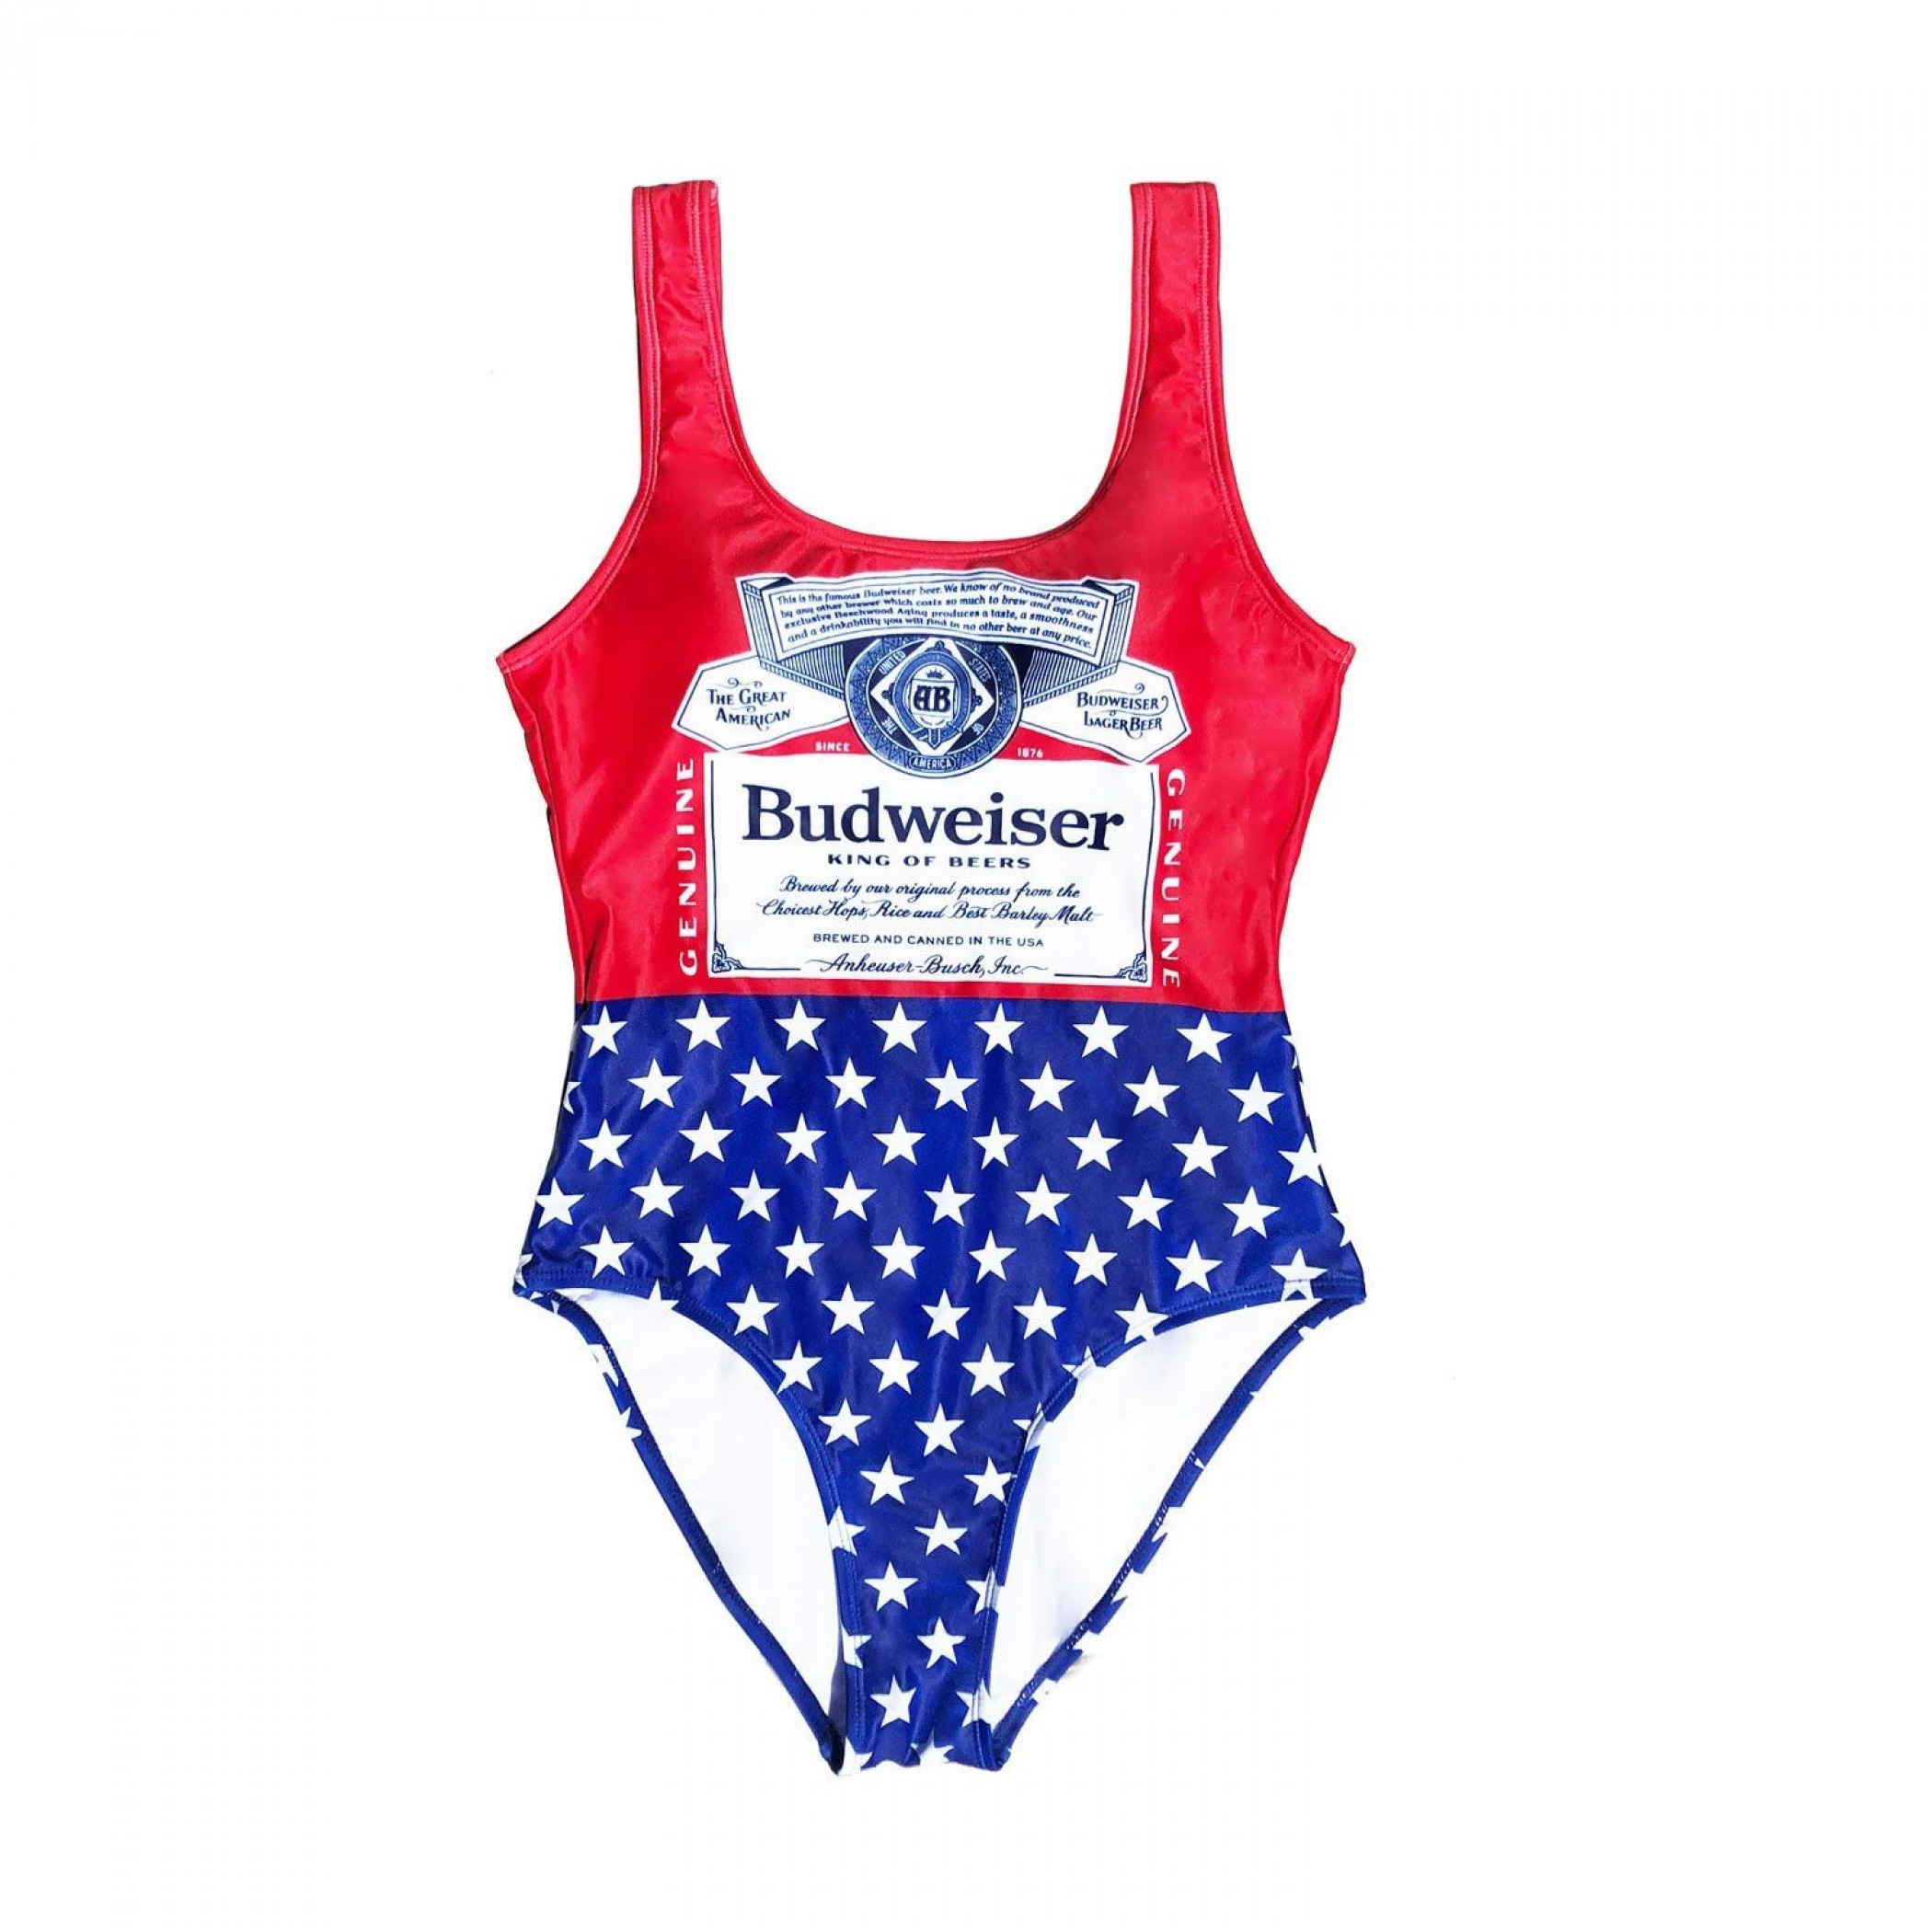 Budweiser Bottle Label and Stars Women's One-Piece Swimsuit